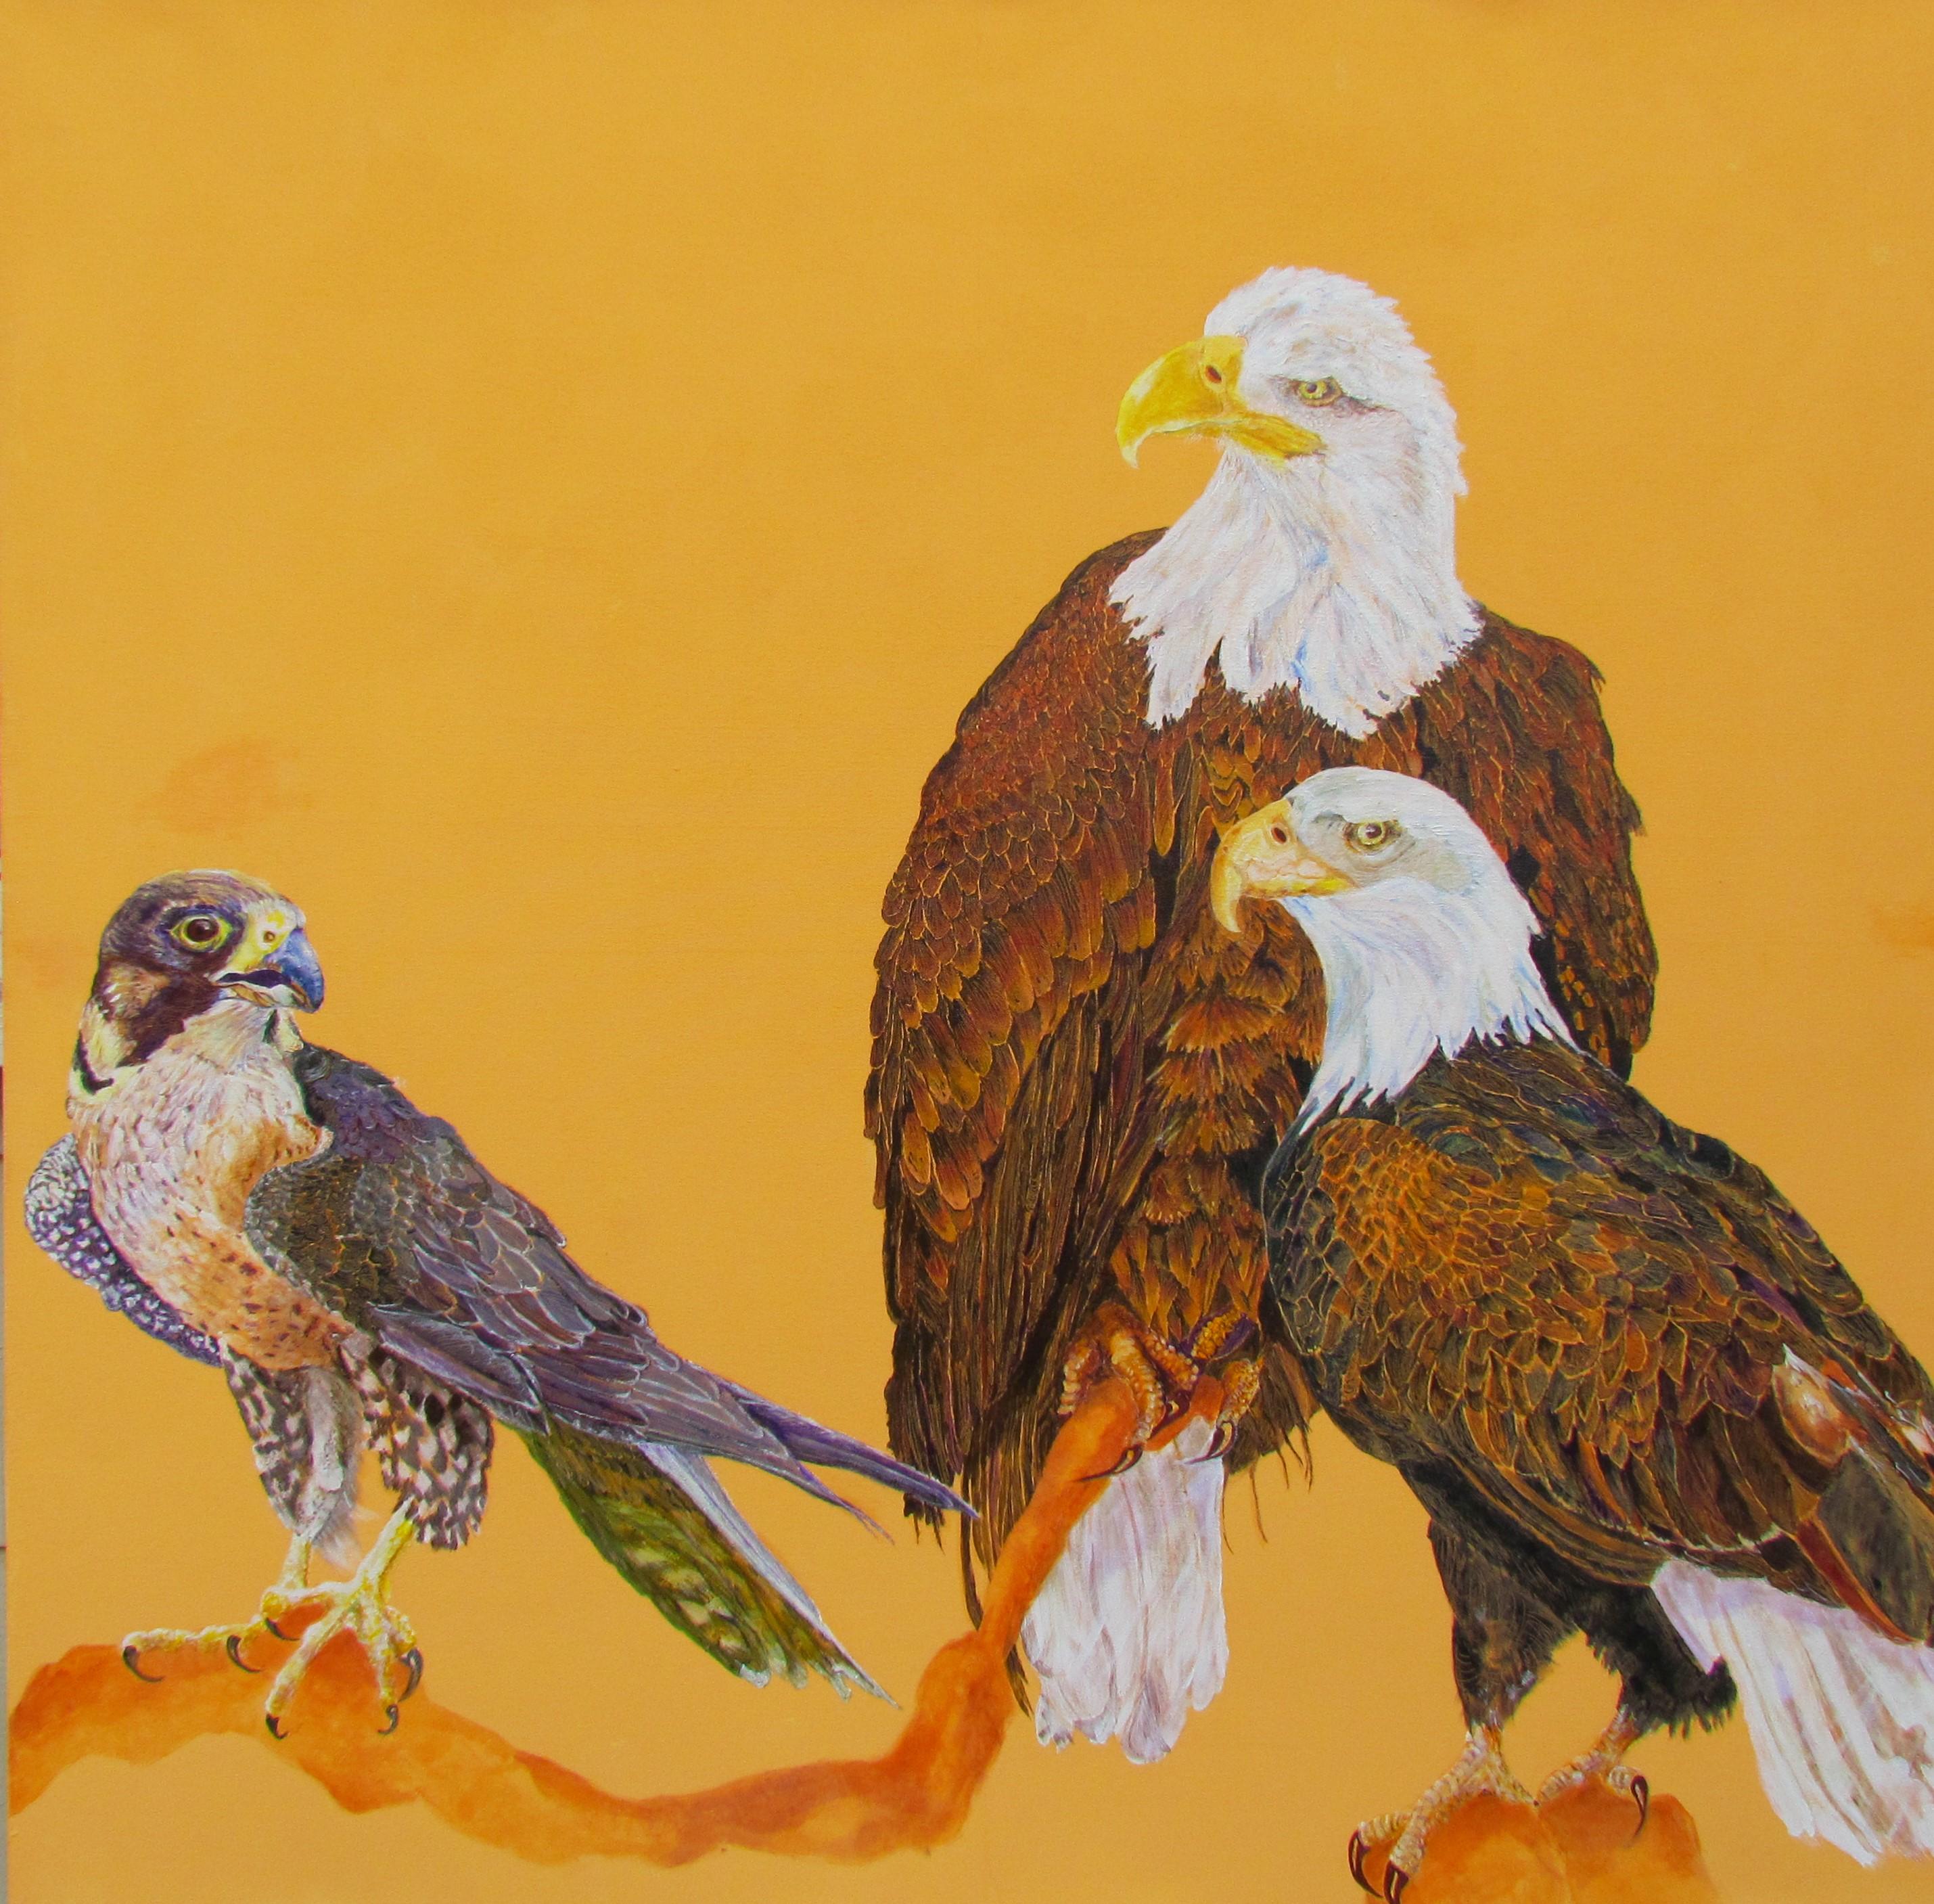 Alison Keenan Animal Painting - Avian Fables: Eagles and Hawk - acrylic and ink on canvas